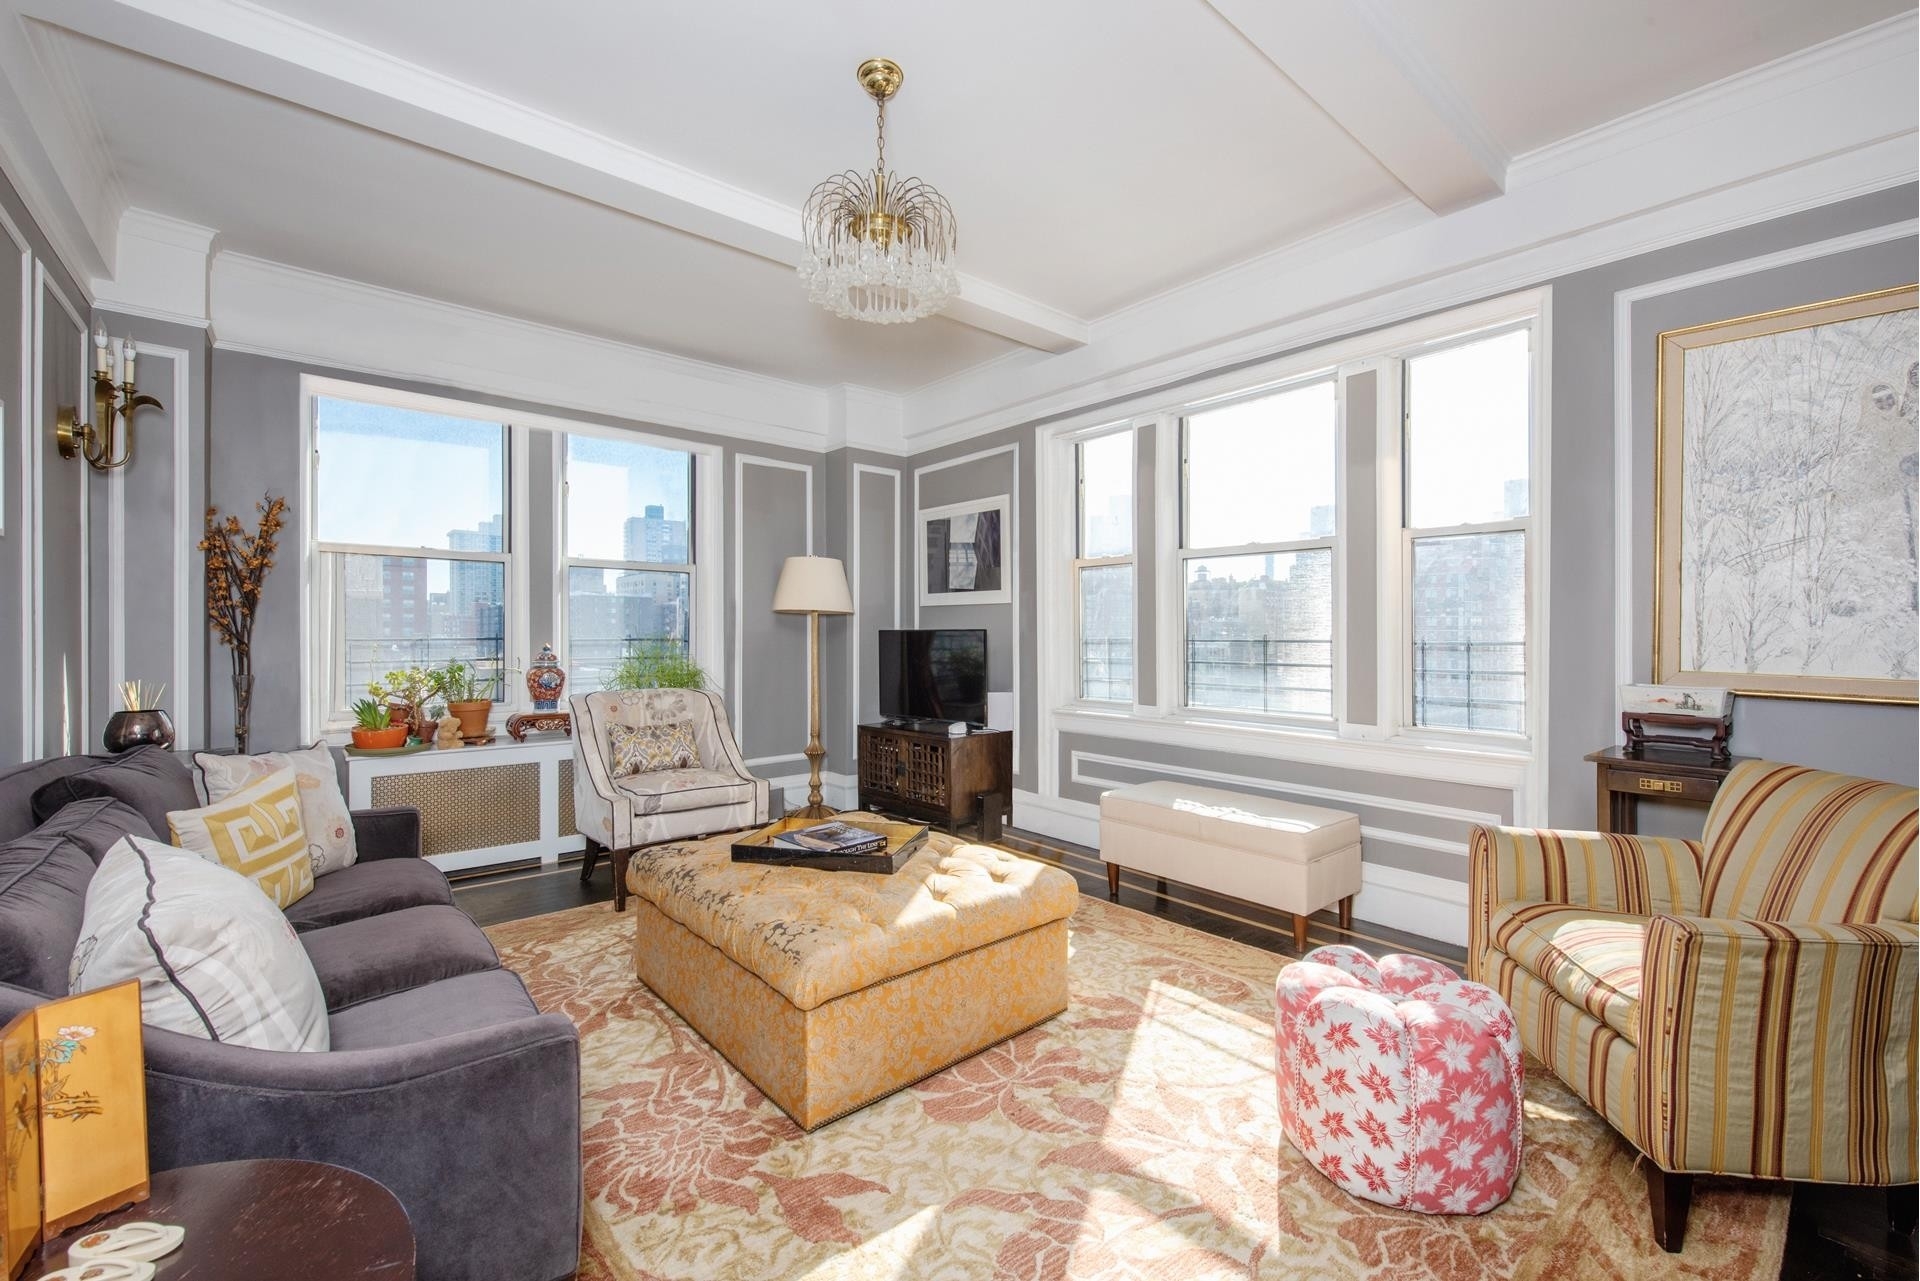 Condominium for Sale at 240 W 98TH ST, 11H Upper West Side, New York, NY 10025